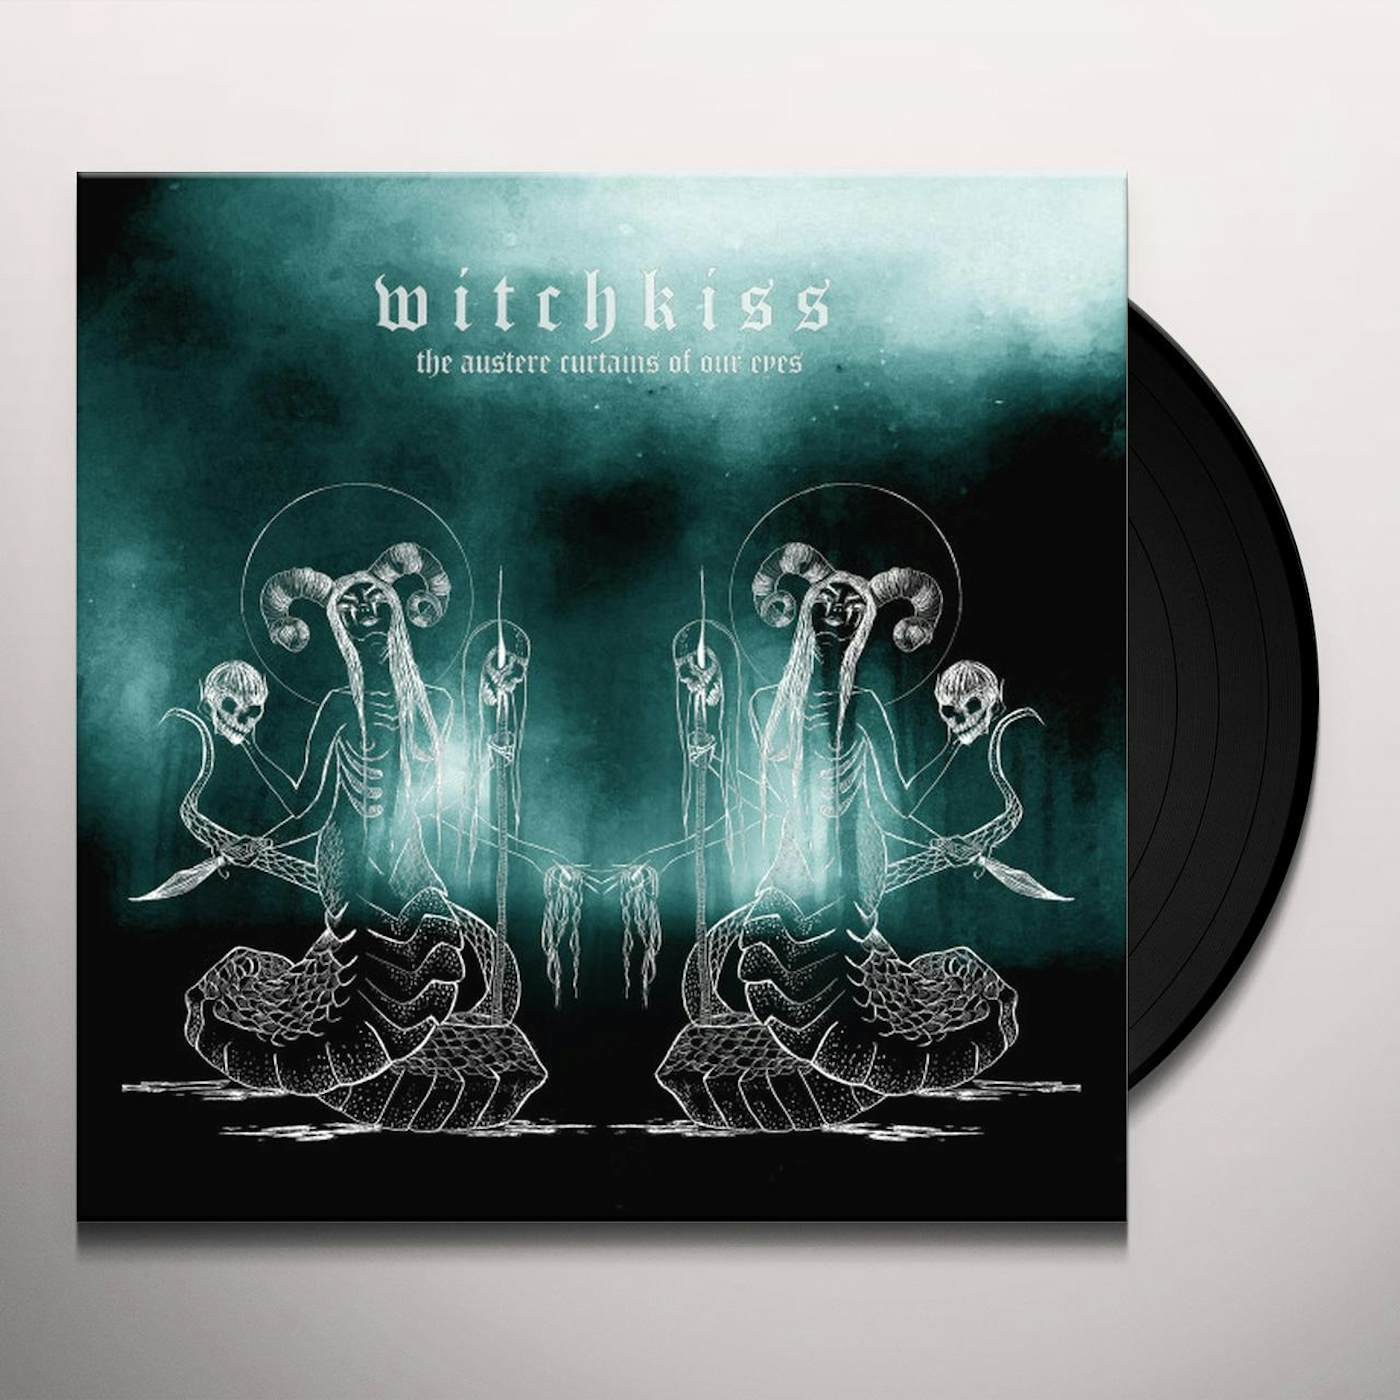 Witchkiss AUSTERE CURTAINS OF OUREYES Vinyl Record